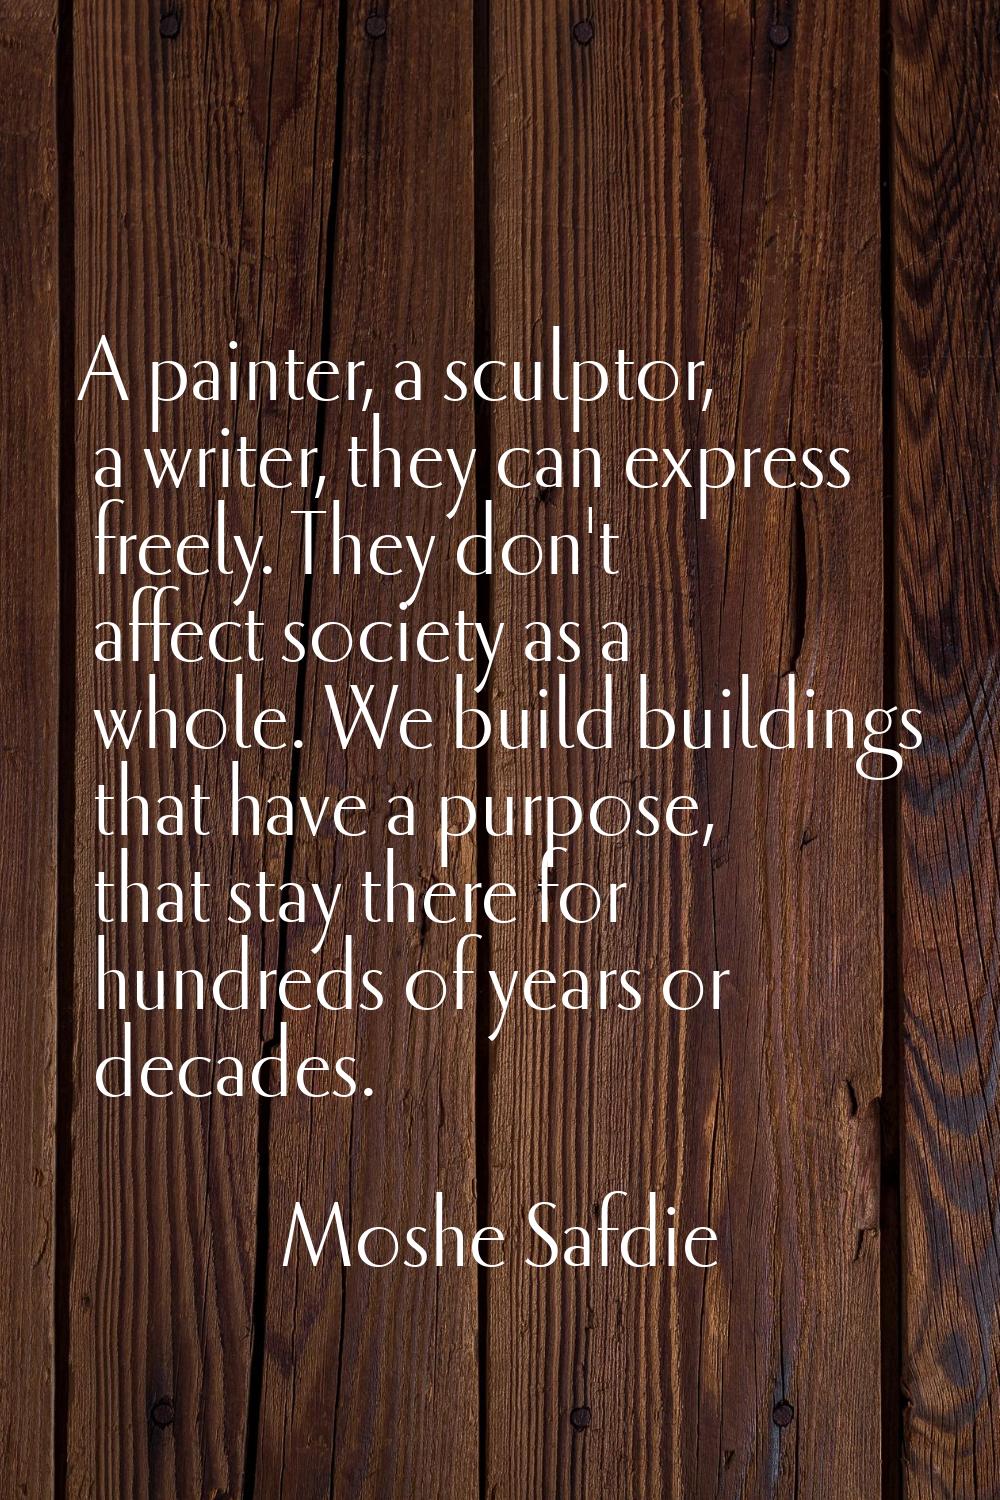 A painter, a sculptor, a writer, they can express freely. They don't affect society as a whole. We 